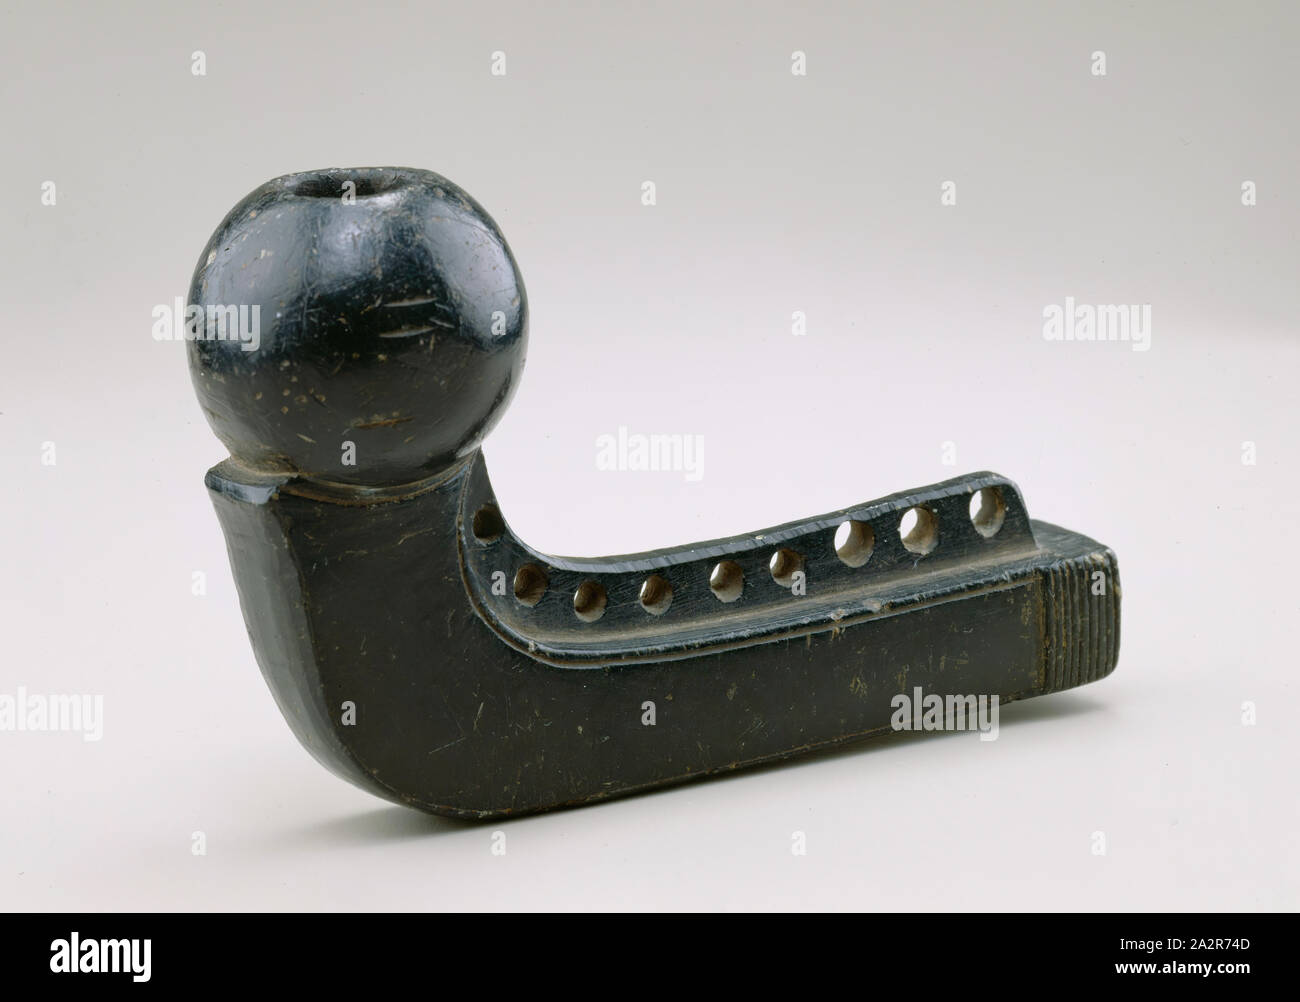 Chippewa, Native American, Pipe Bowl, ca. 1850, black/brown stone (olivine series, possibly fayalite), Overall: 3 3/8 × 5 1/4 × 1 3/4 inches (8.6 × 13.3 × 4.4 cm Stock Photo